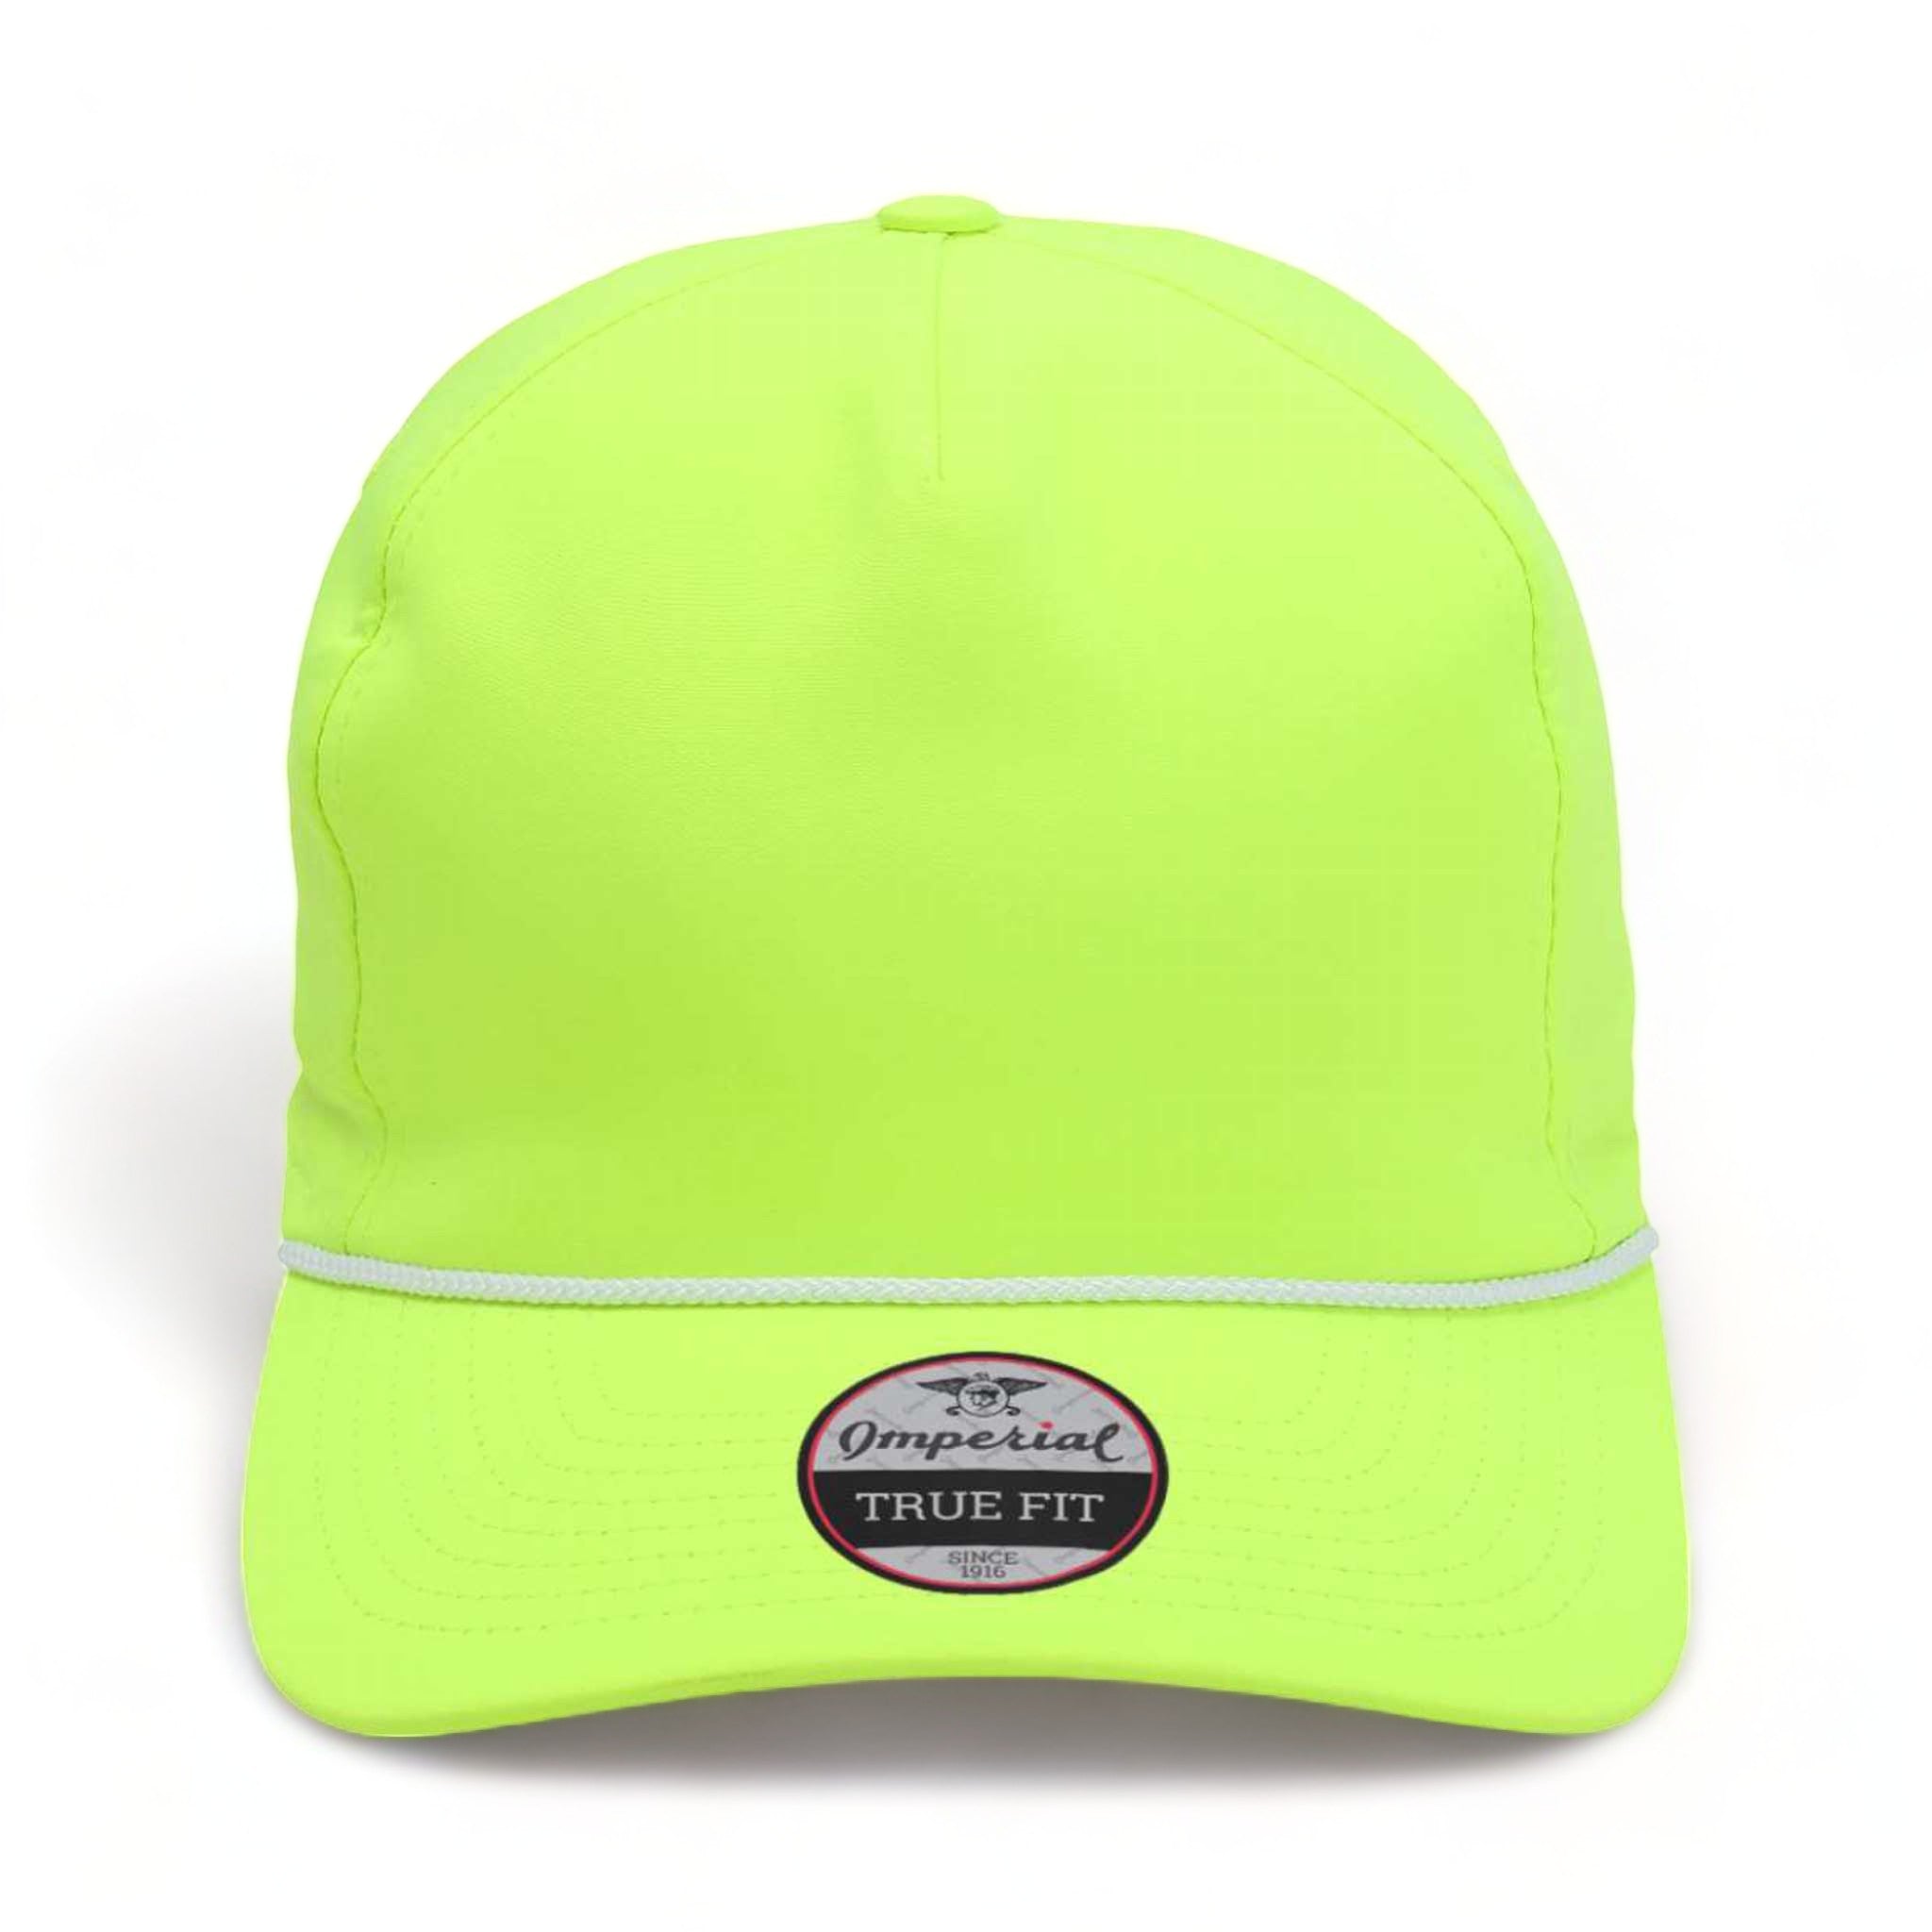 Front view of Imperial 5054 custom hat in neon yellow and white